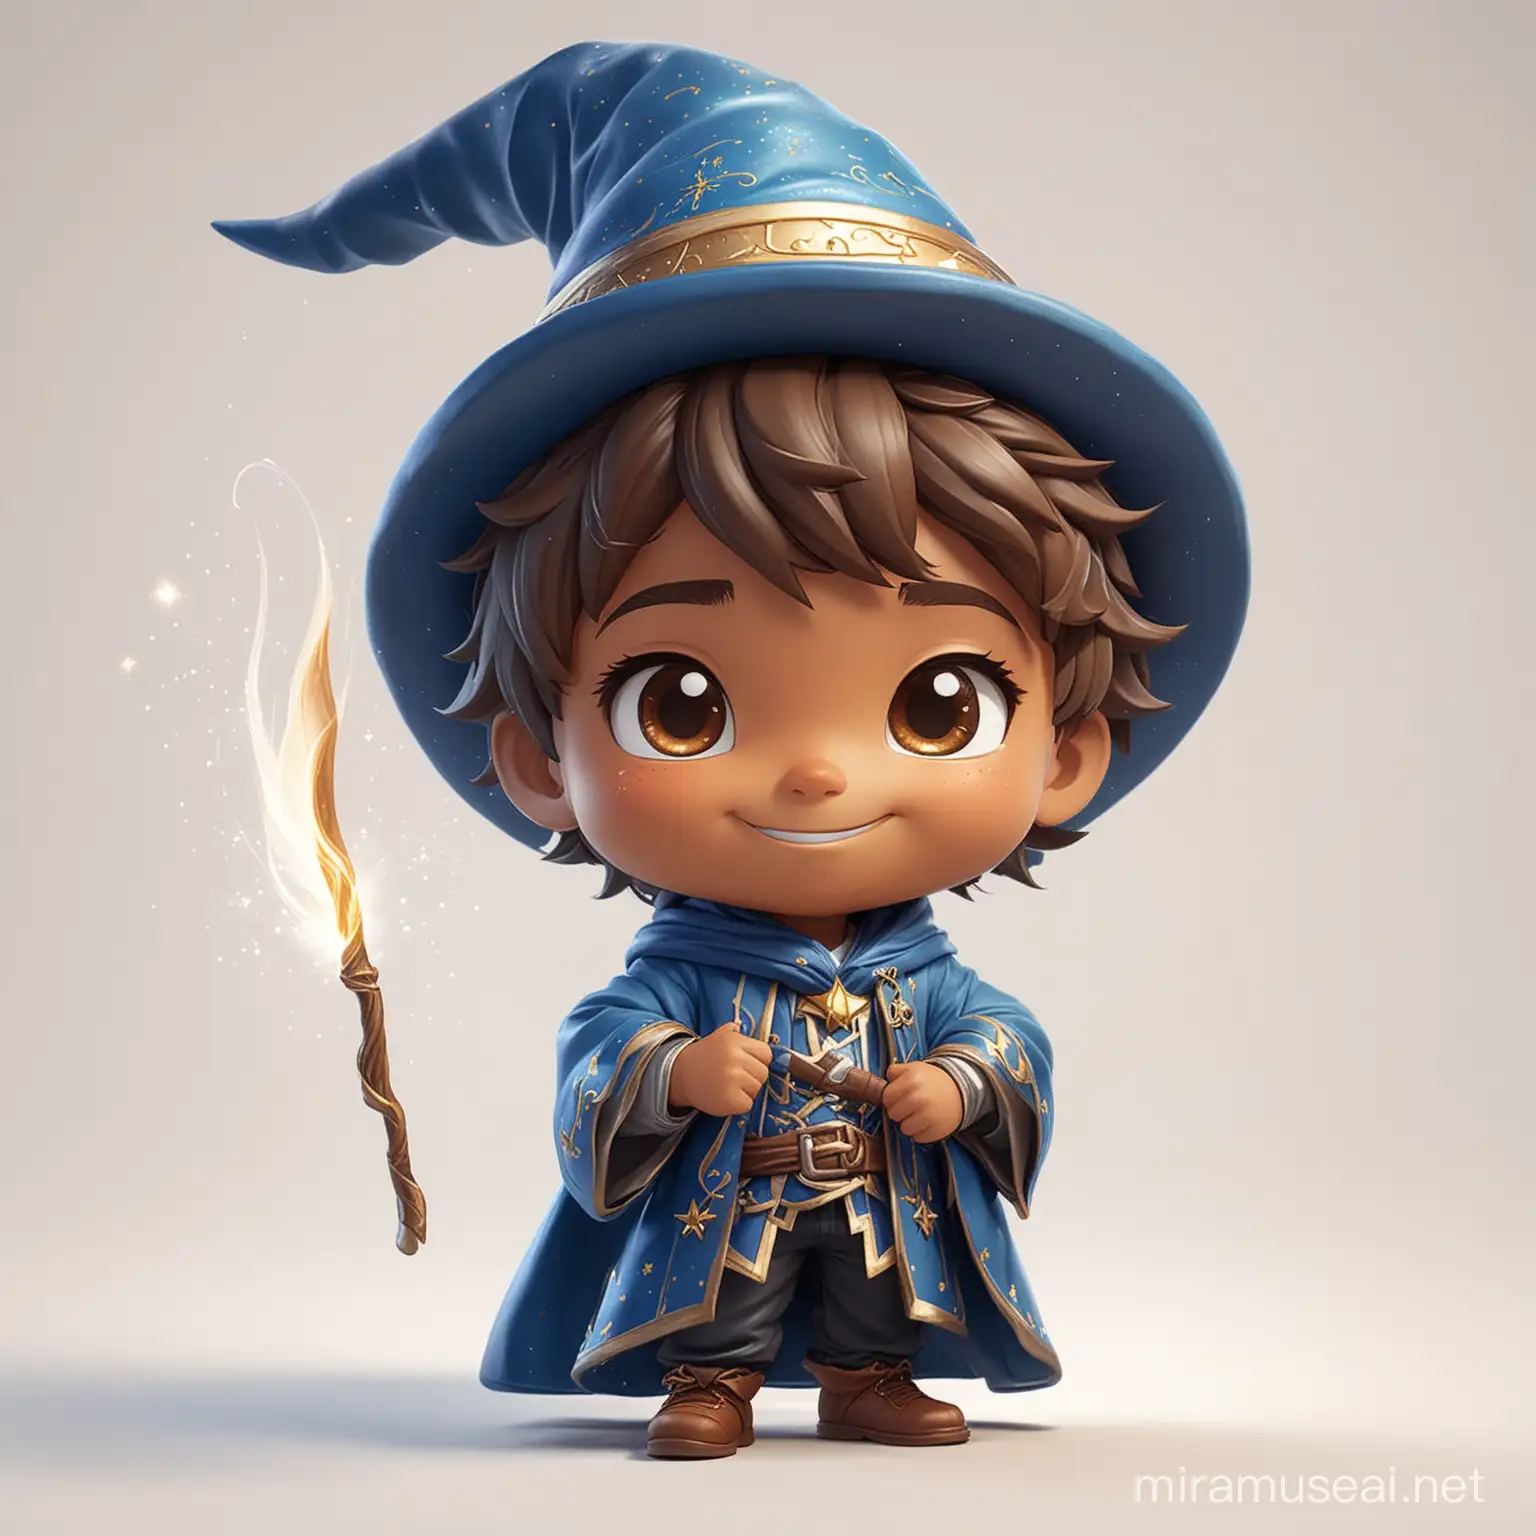 male child magical wizard smiling medium brown skin wearing blue on a white background full body chibi style